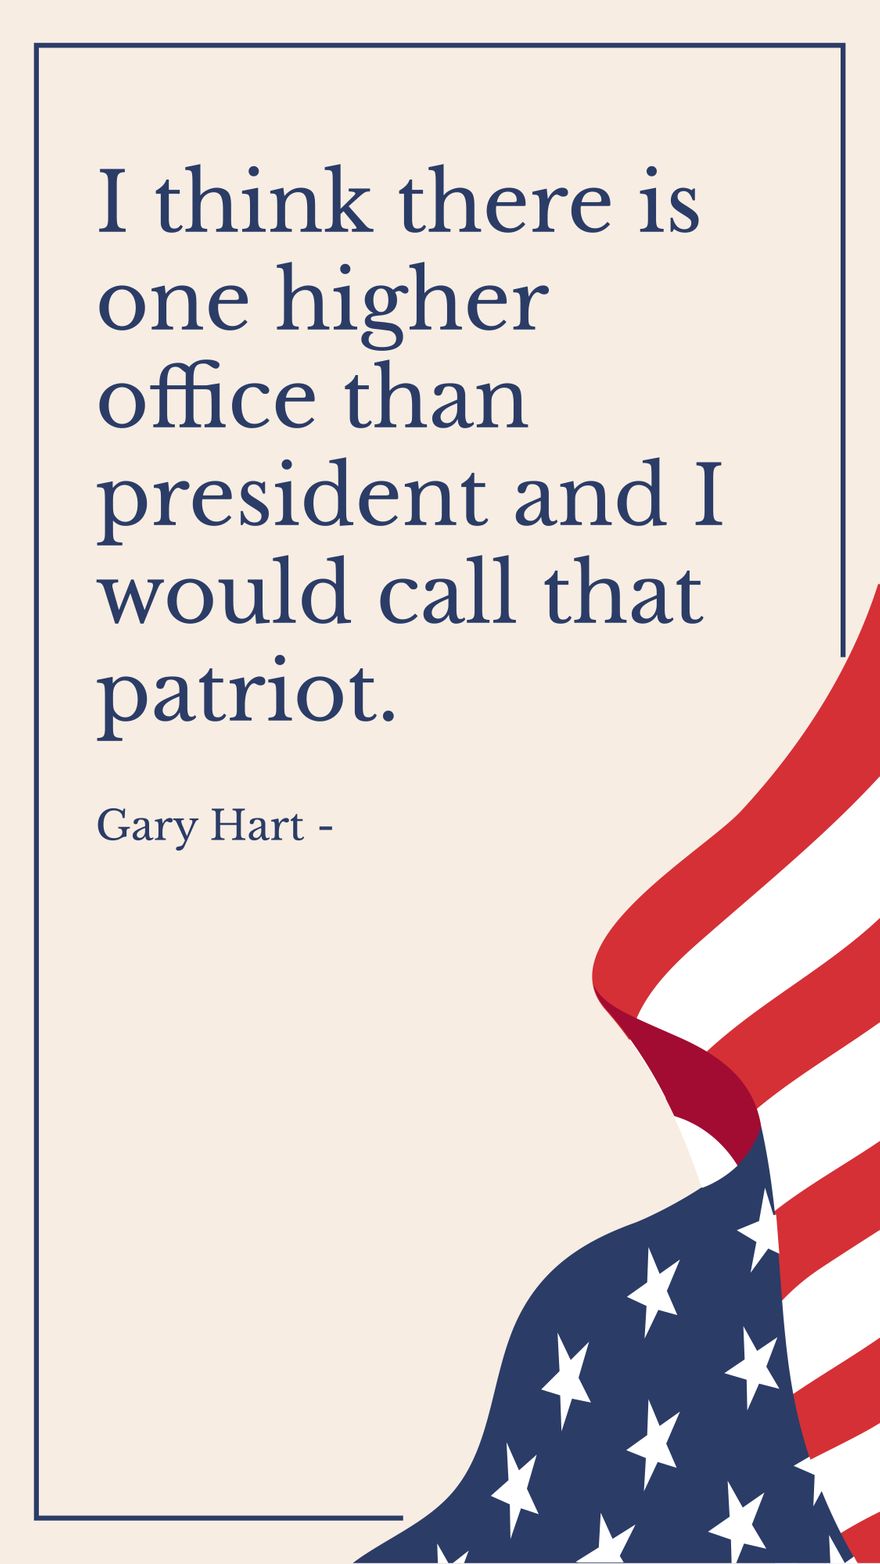 Free Gary Hart - I think there is one higher office than president and I would call that patriot. in JPG